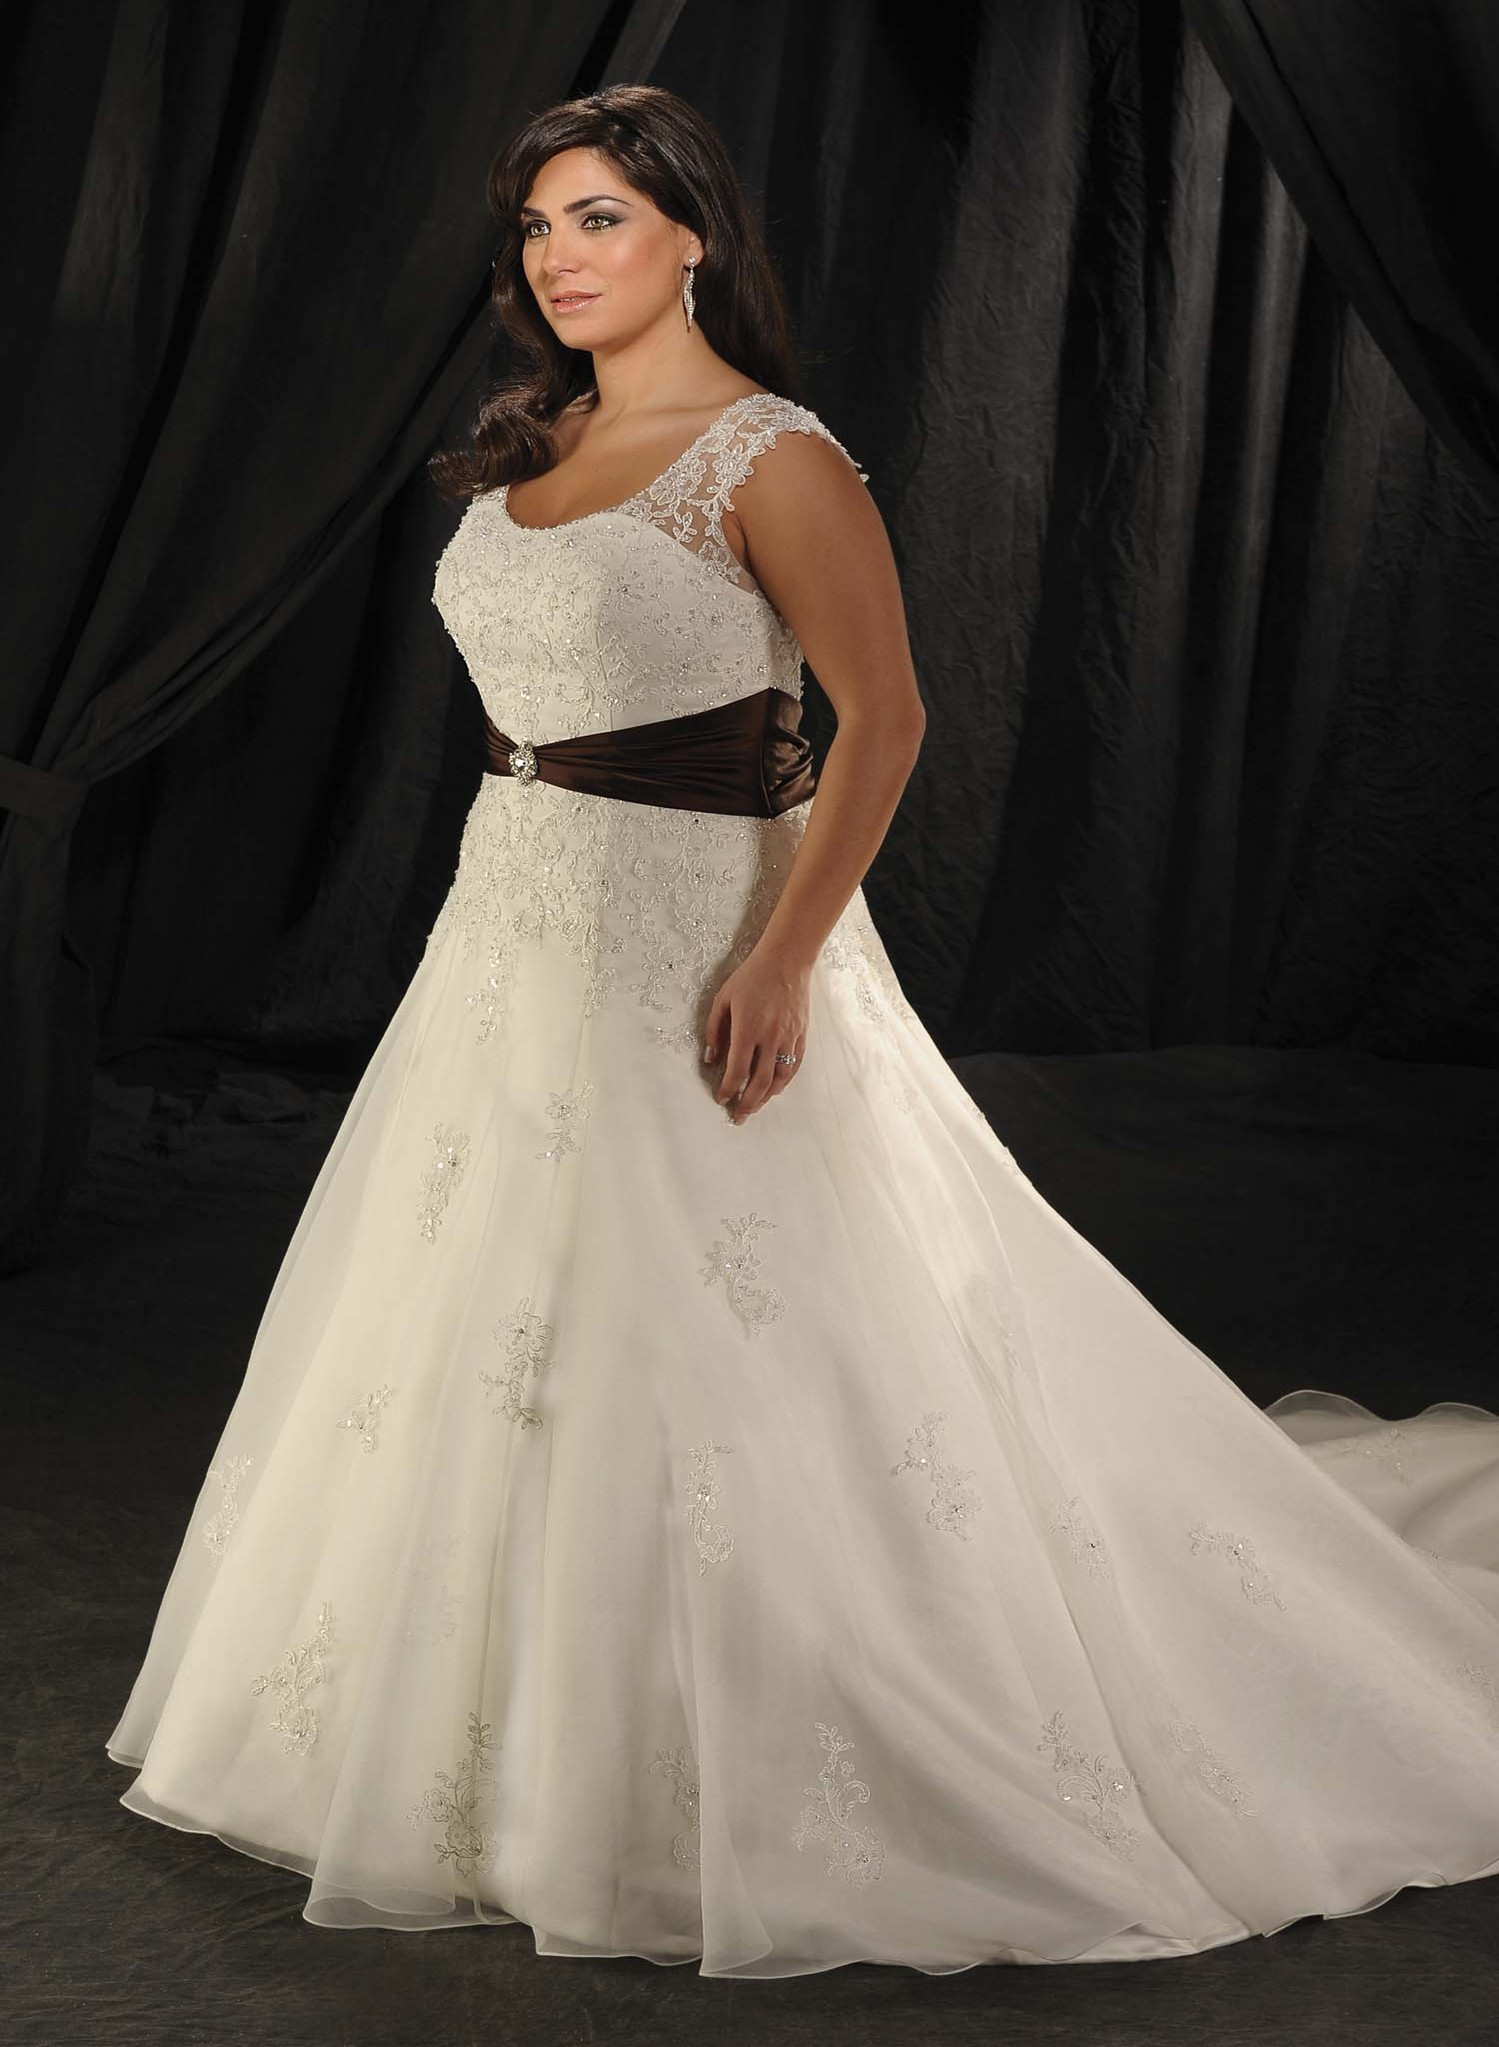 Plus Wedding Gowns
 The Wedding Dress Guide for Full figured Brides